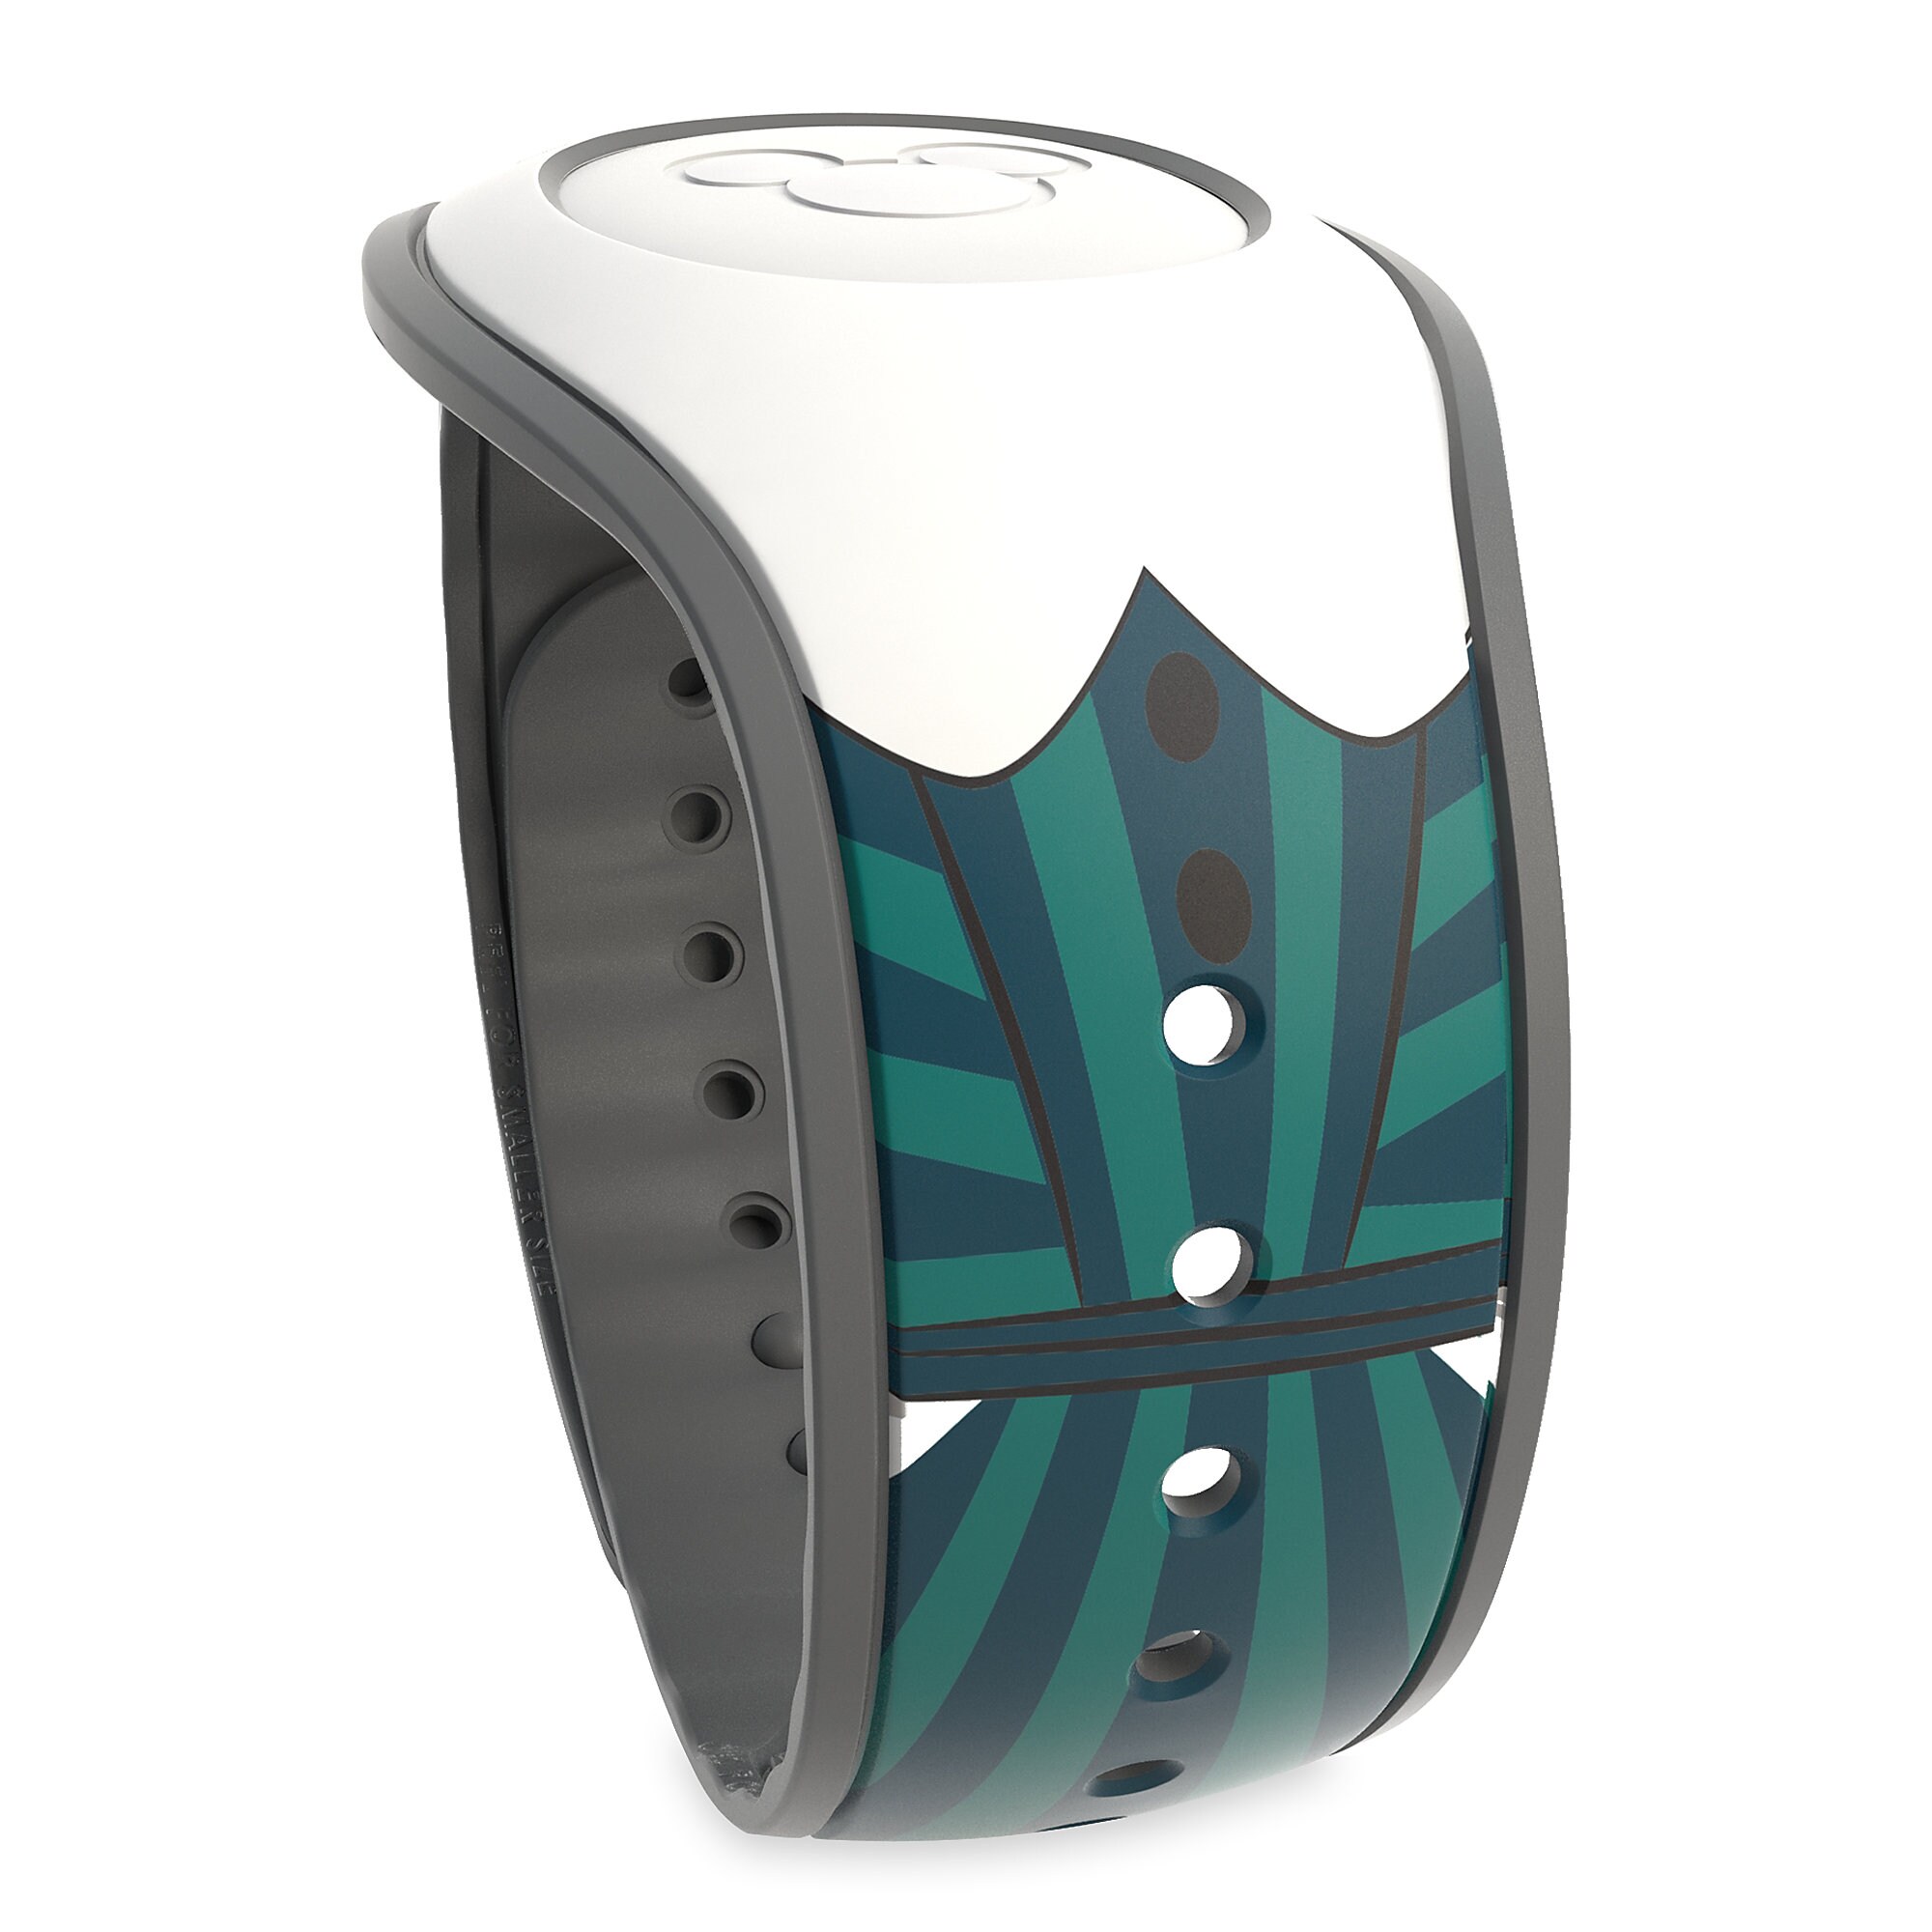 The Haunted Mansion Maid and Butler MagicBand 2